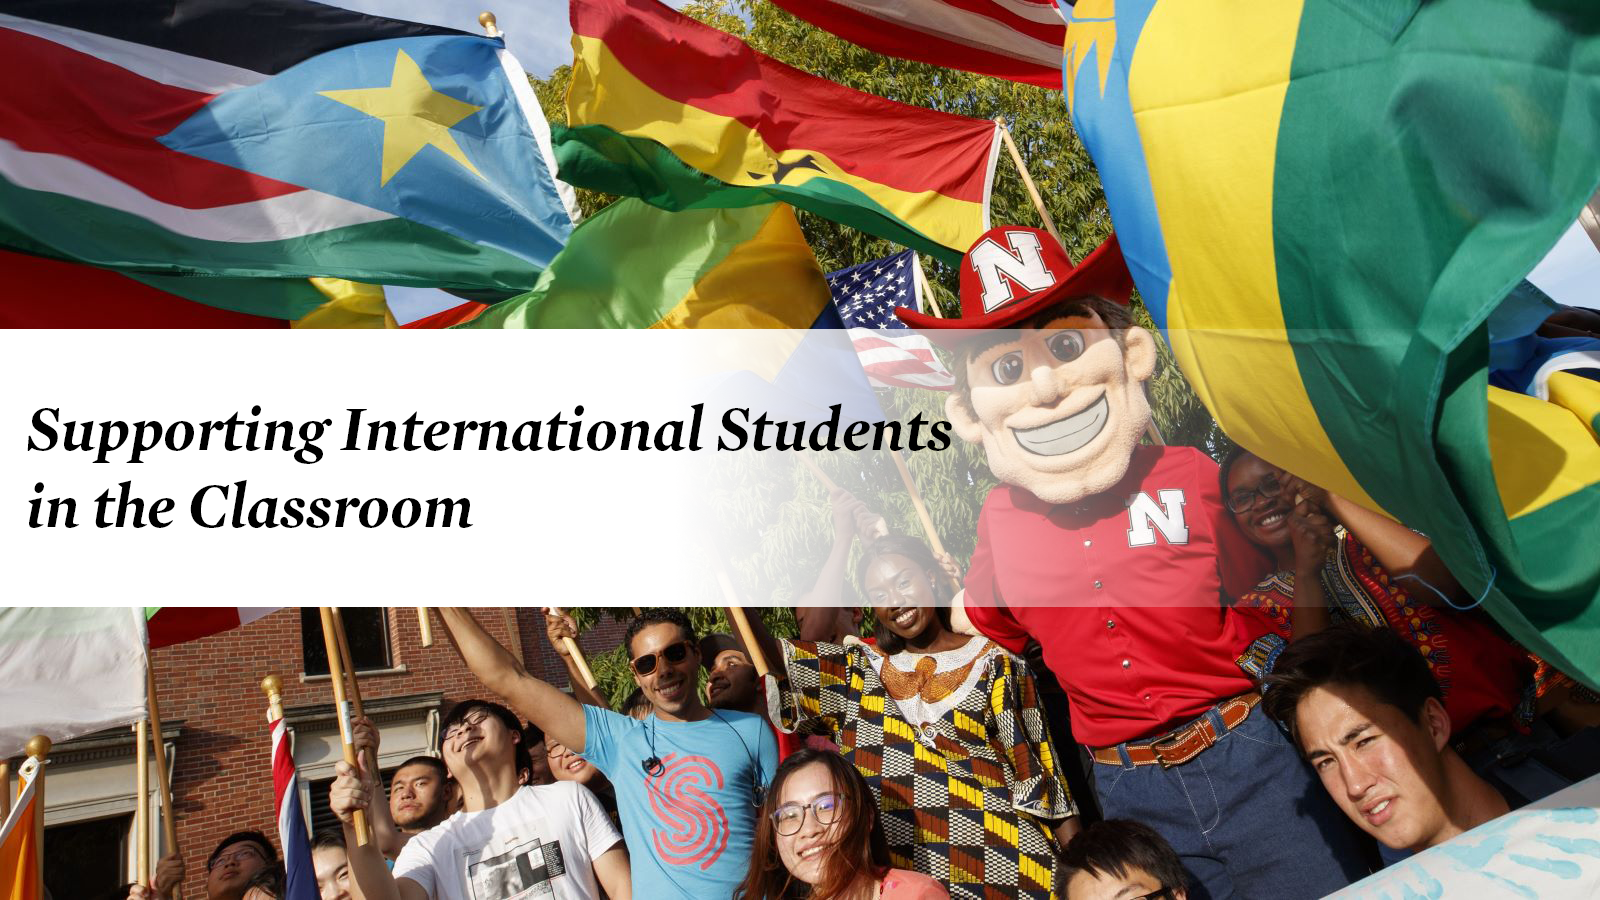 Herbie Husker and international students flying flags of different countries